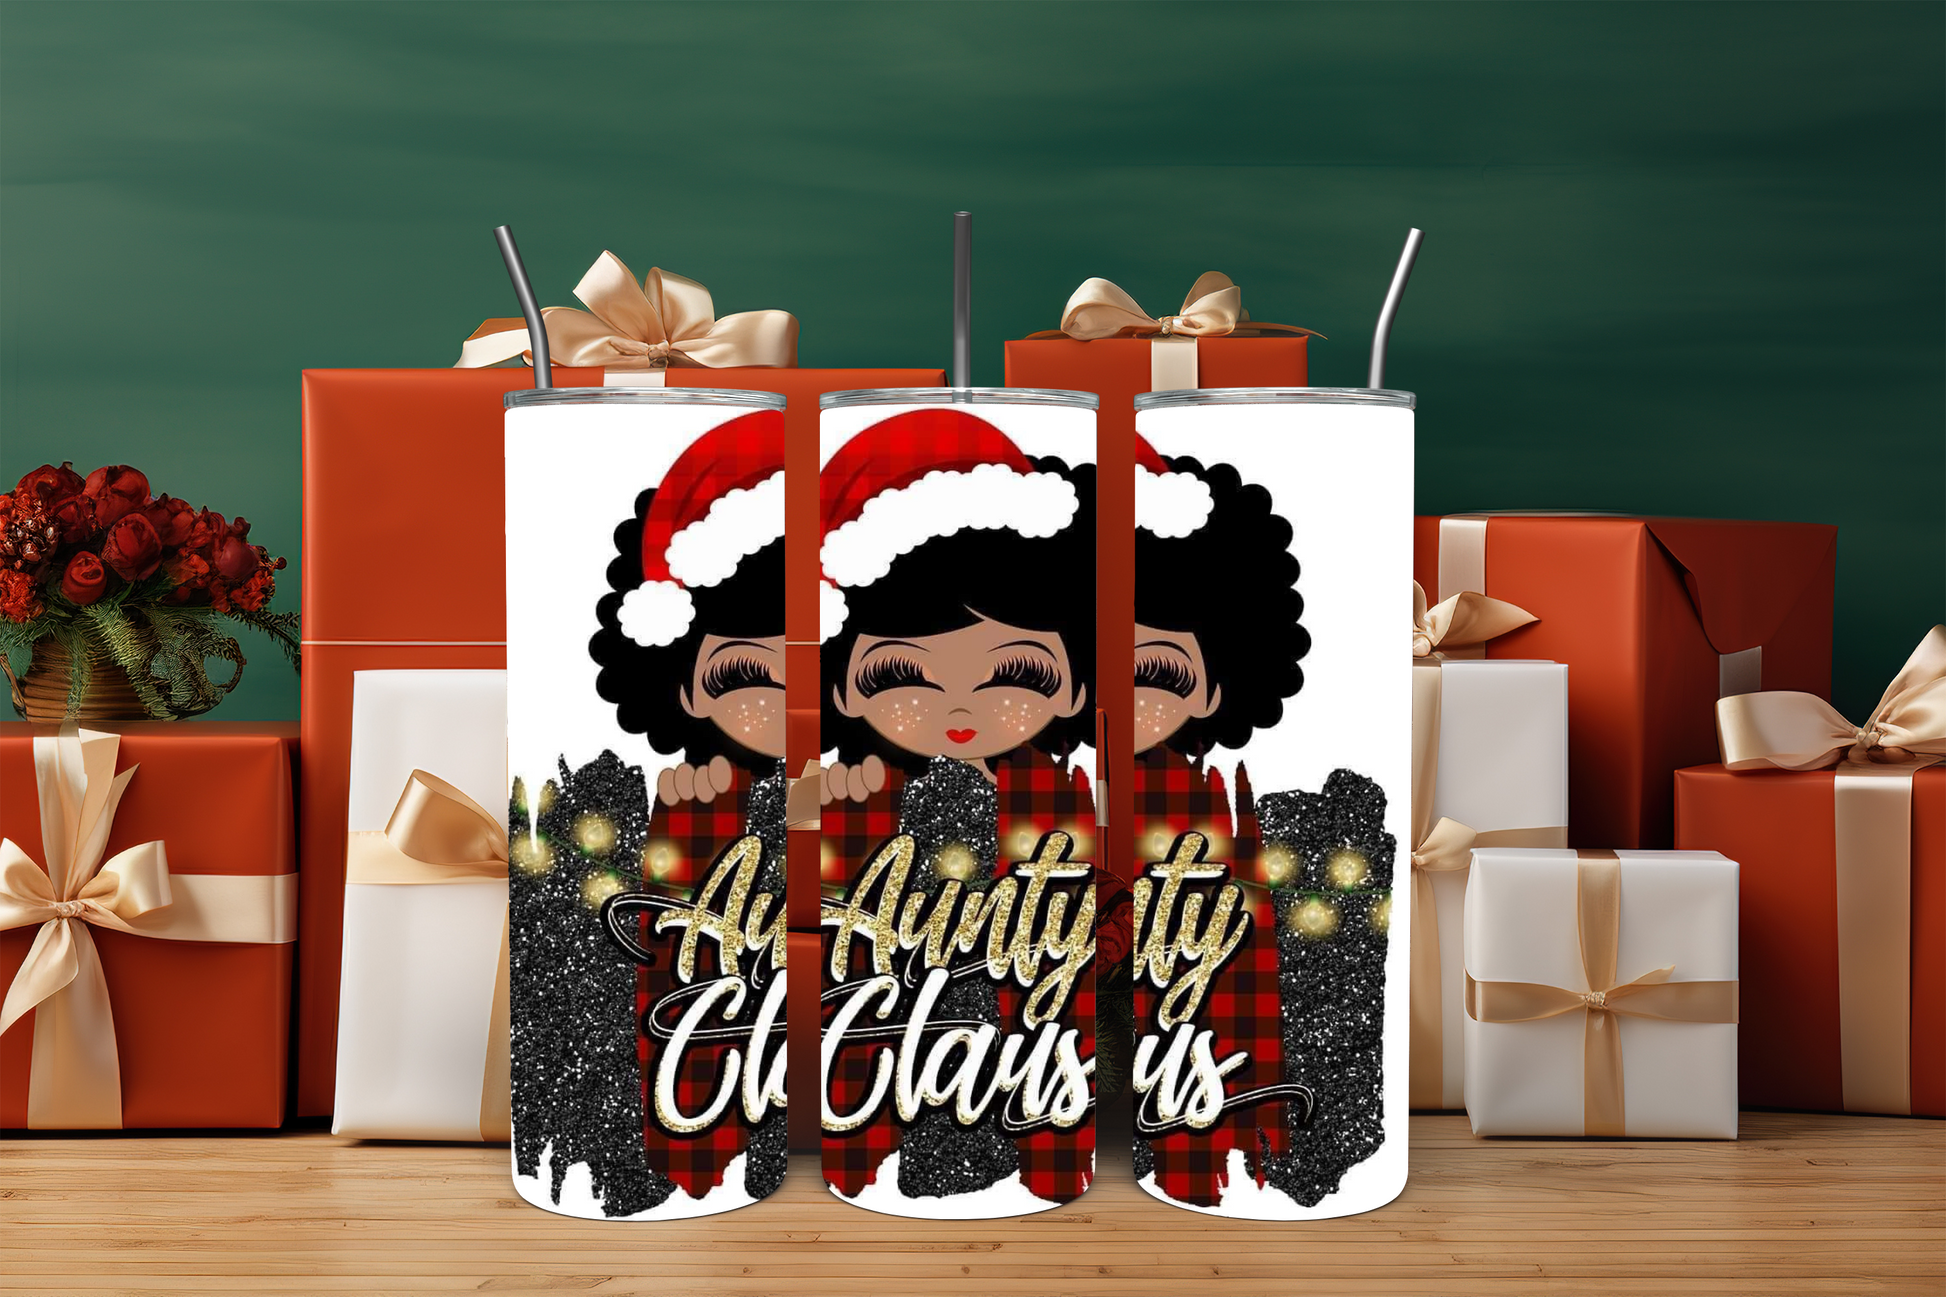 Christmas tumbler with words "aunty claus"